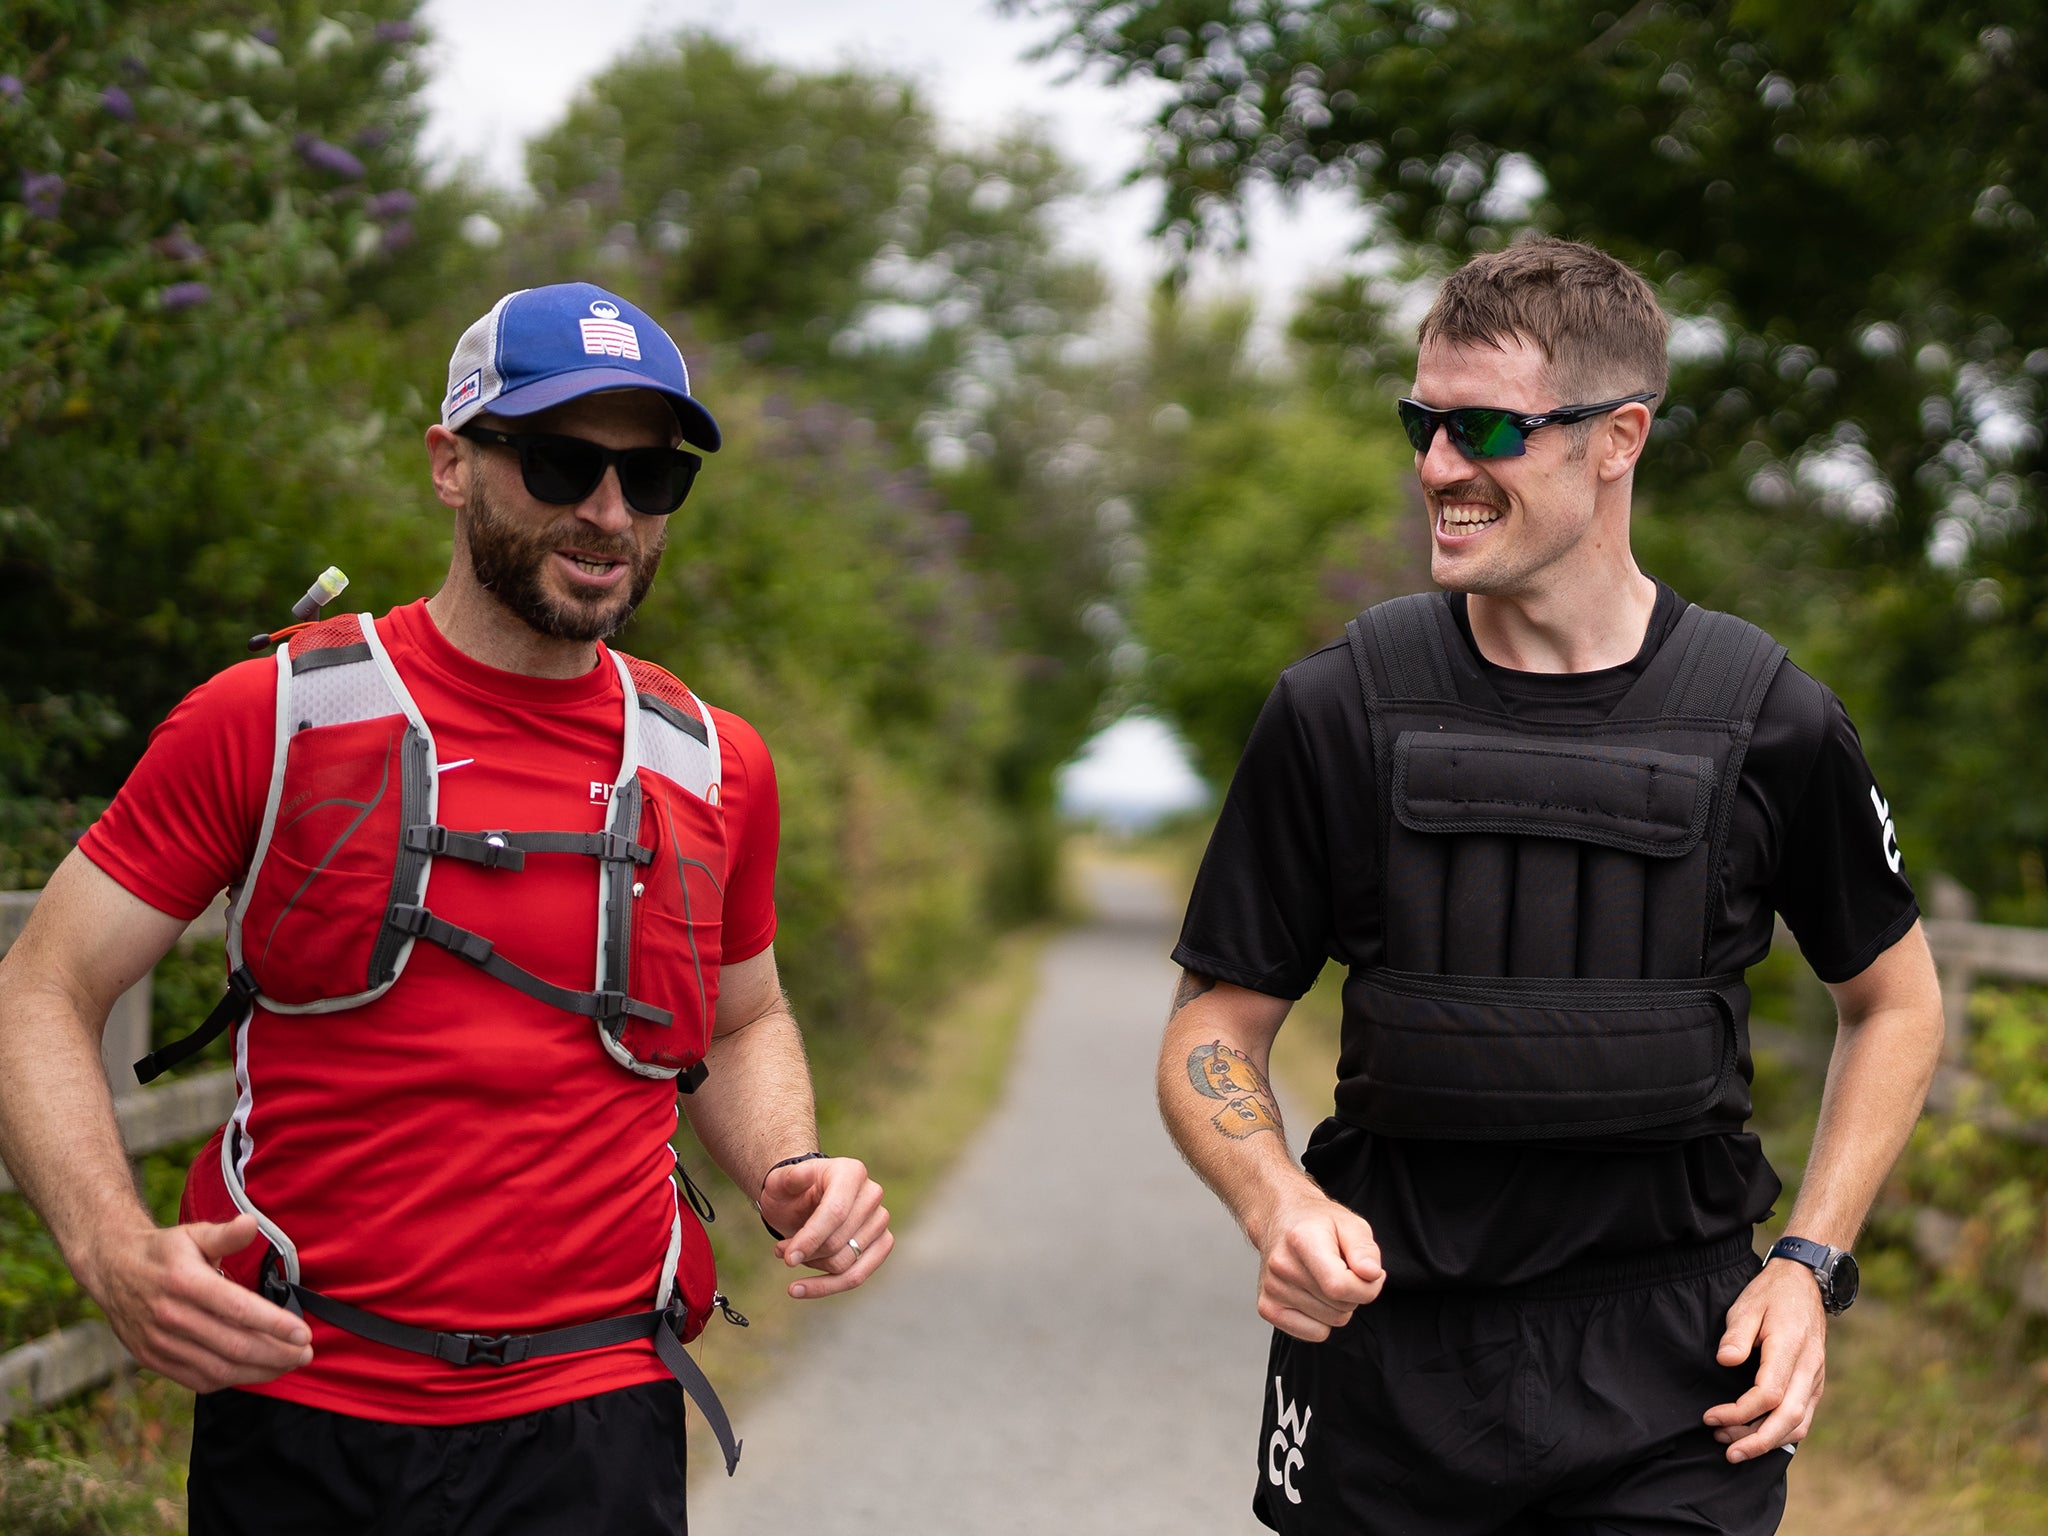 Conor O’Keeffe (right) during one of his marathons